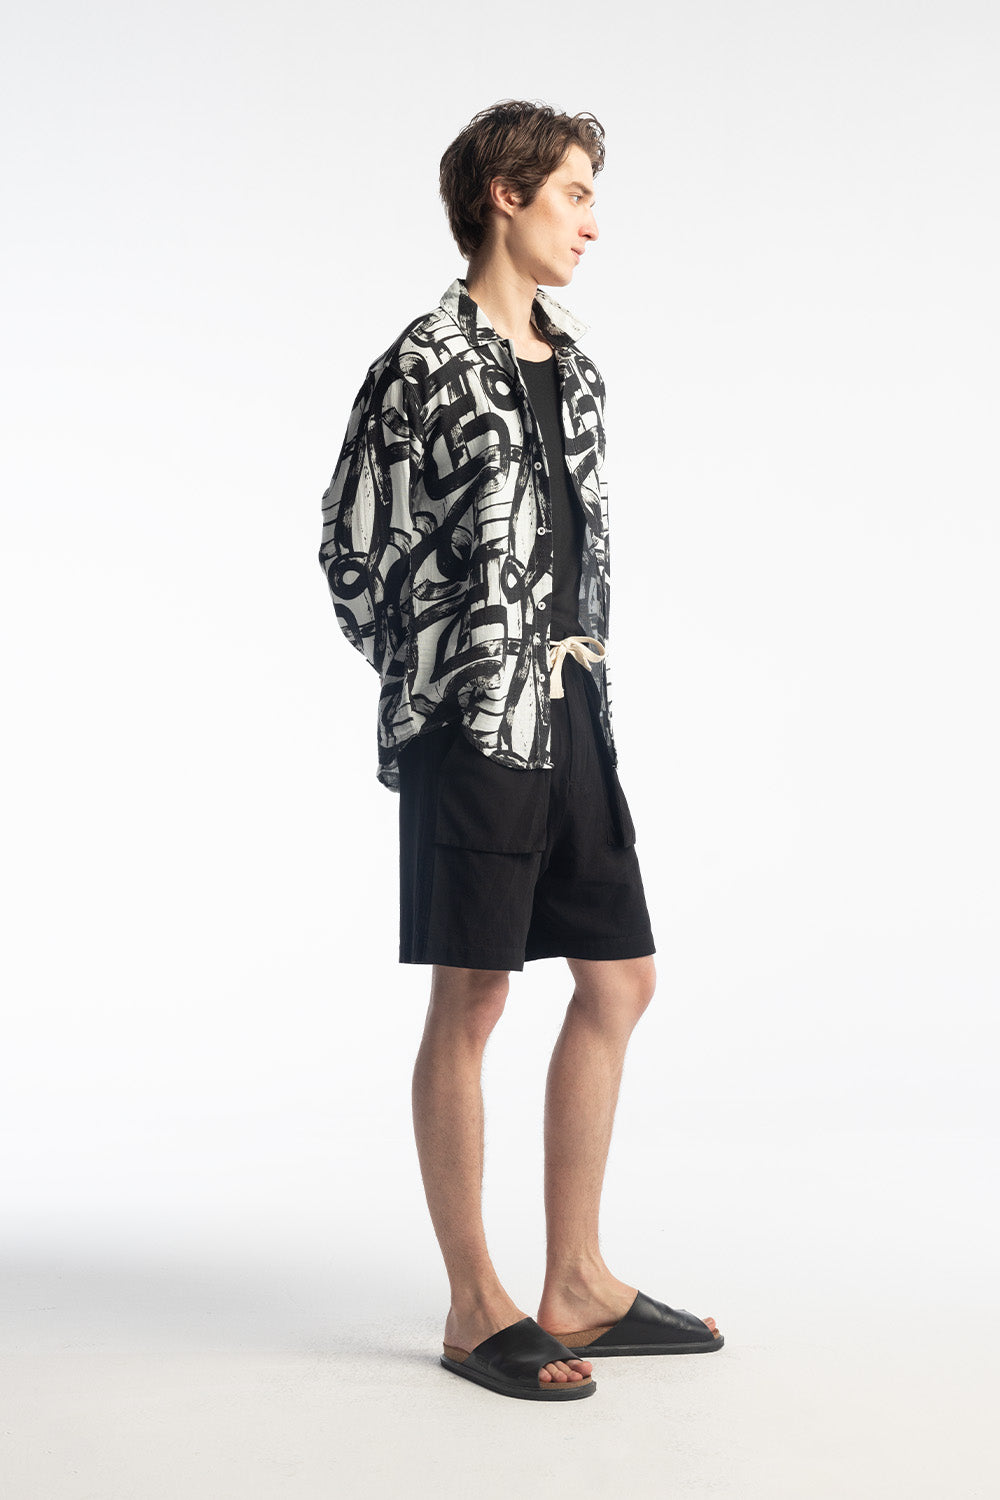 ABSTRACT PATTERNED WRINKLED LOOK SHIRT